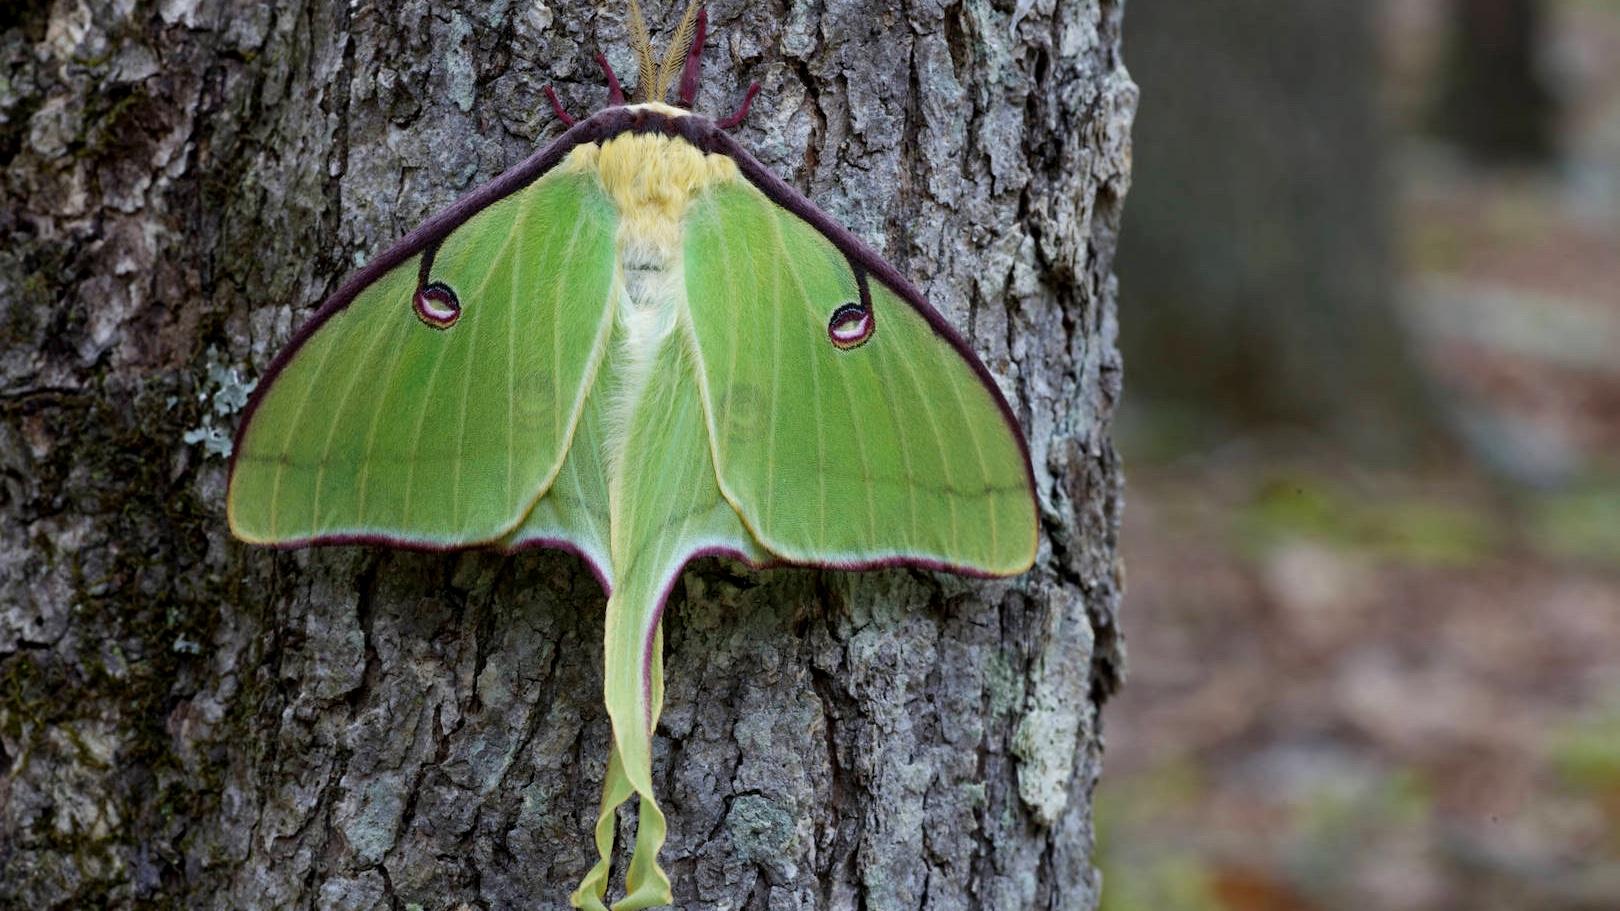 As colorful and glamorous as a butterfly, the luna spicebush moth. (Courtesy of U.S. Fish and Wildlife Service)